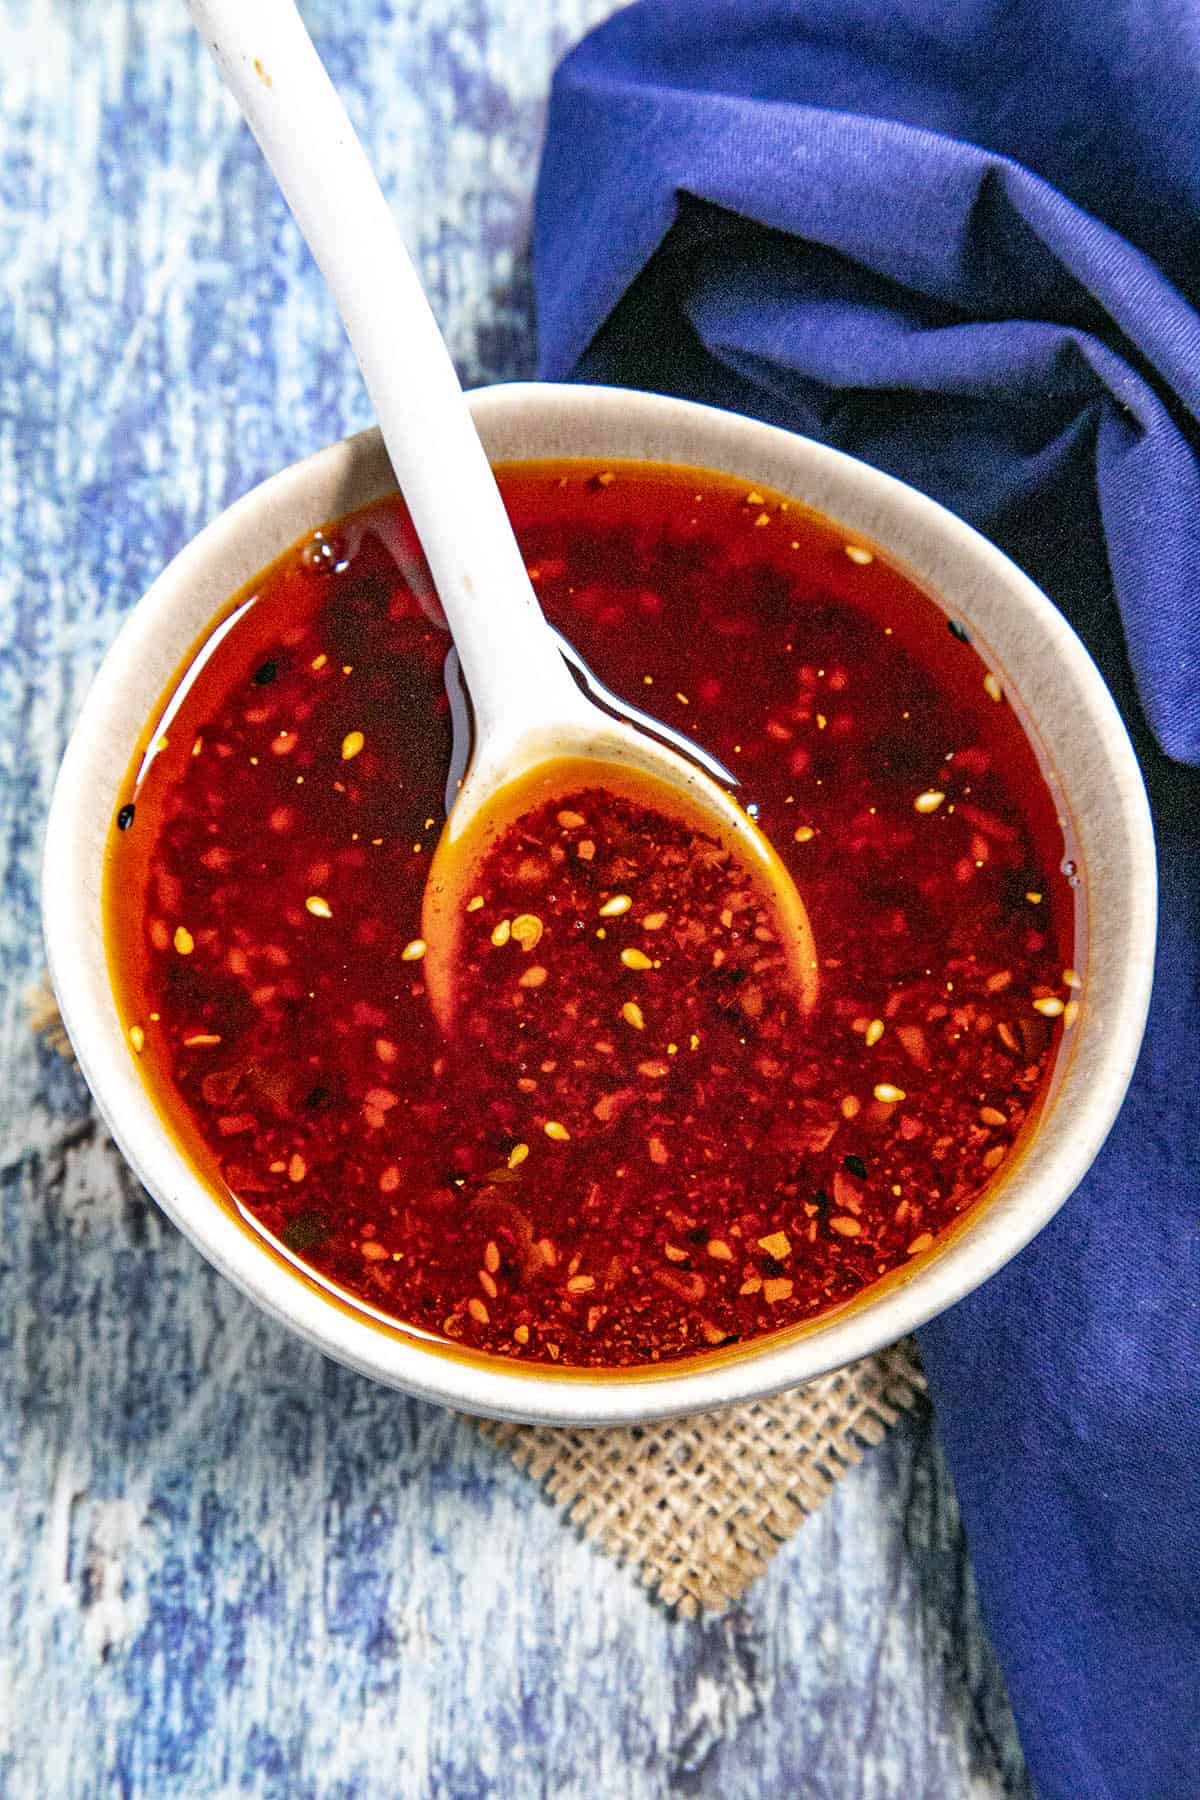 Rayu (Japanese Chili Oil) in a bowl with a spoon